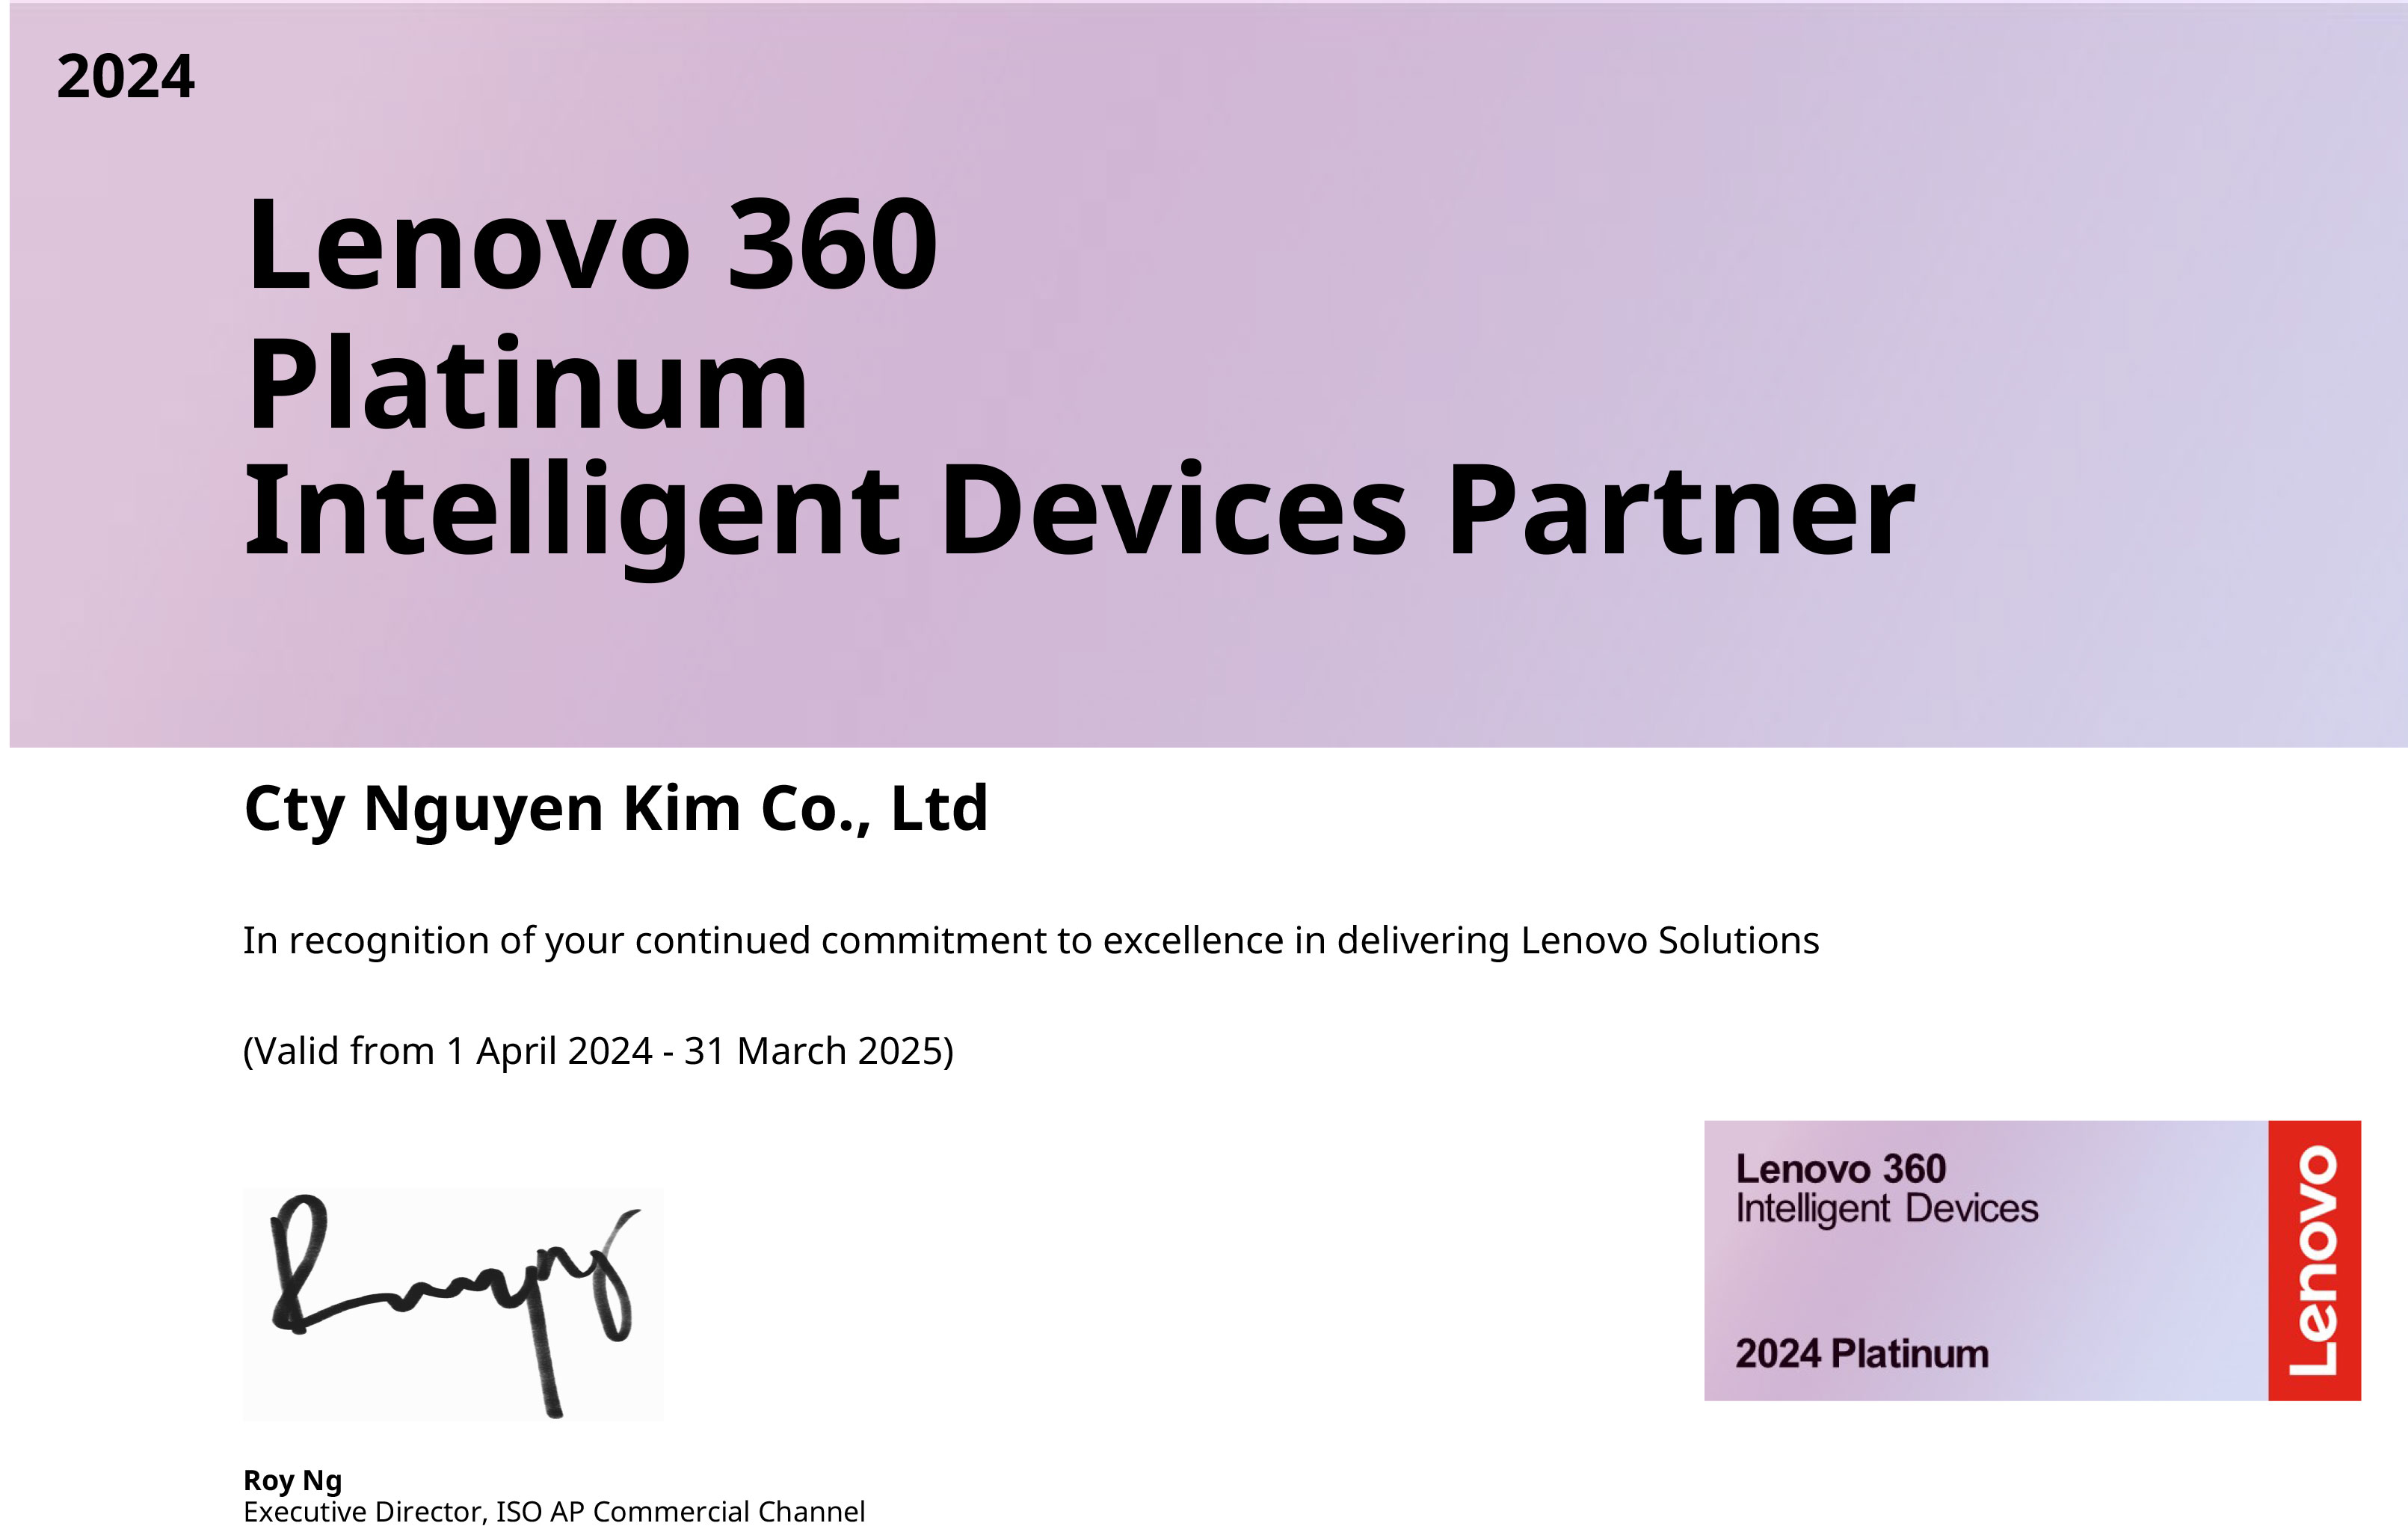 Lenovo 360 Intelligent Devices Business Certificate 2025